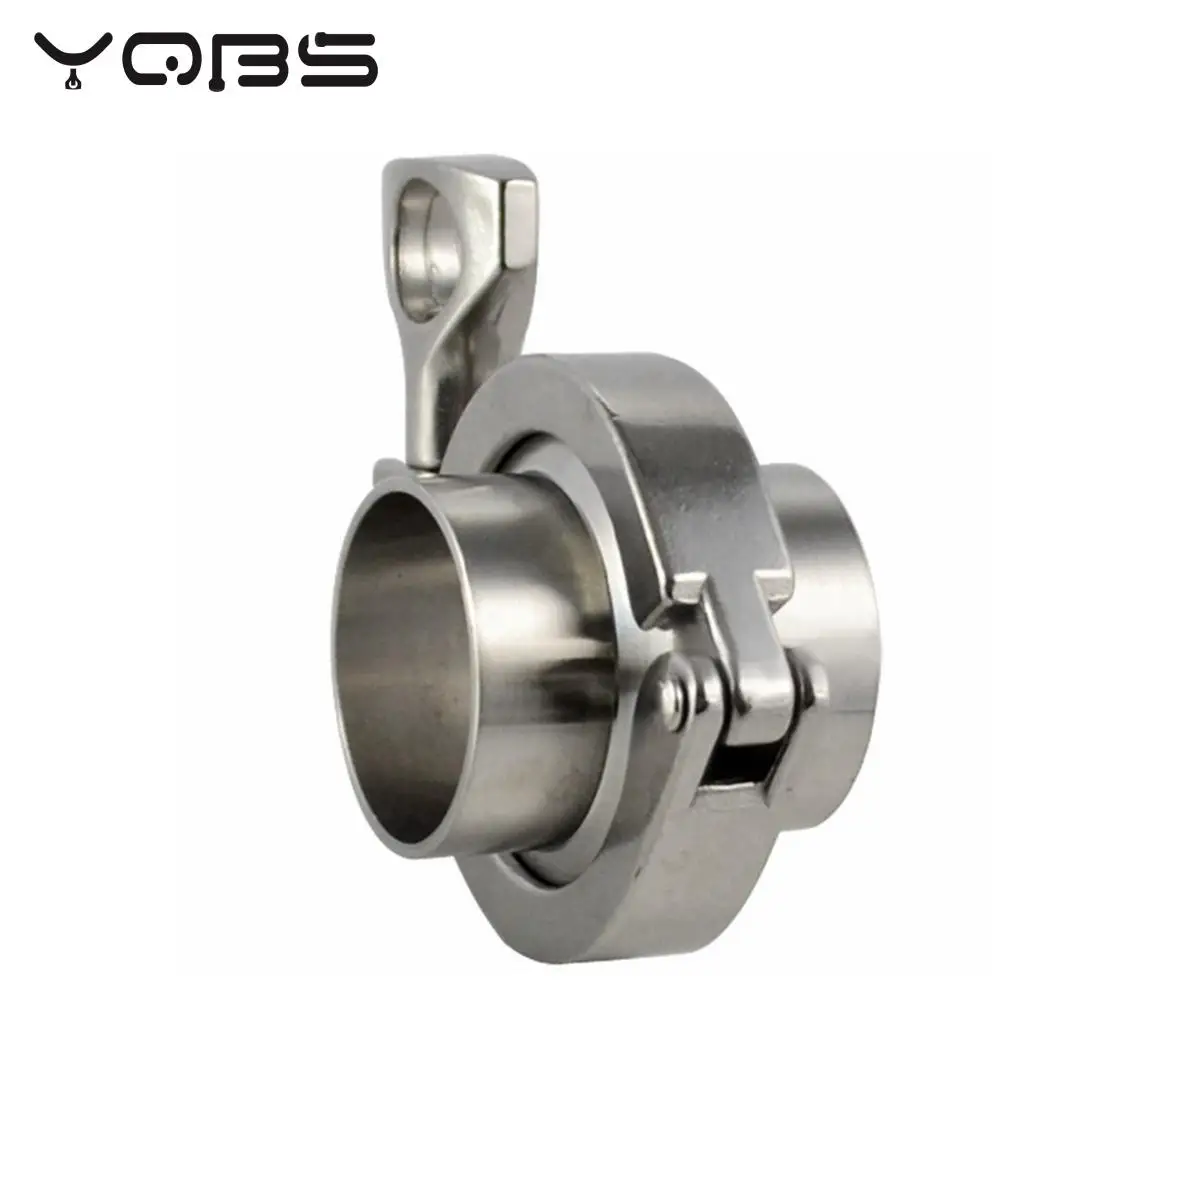 YQBS Triclamp SS Sanitary Flange Pipe  Weld Welding Ferrule Tri Clamp  PTFE  or Silicone Gasket  Stainless Steel SUS SS 304